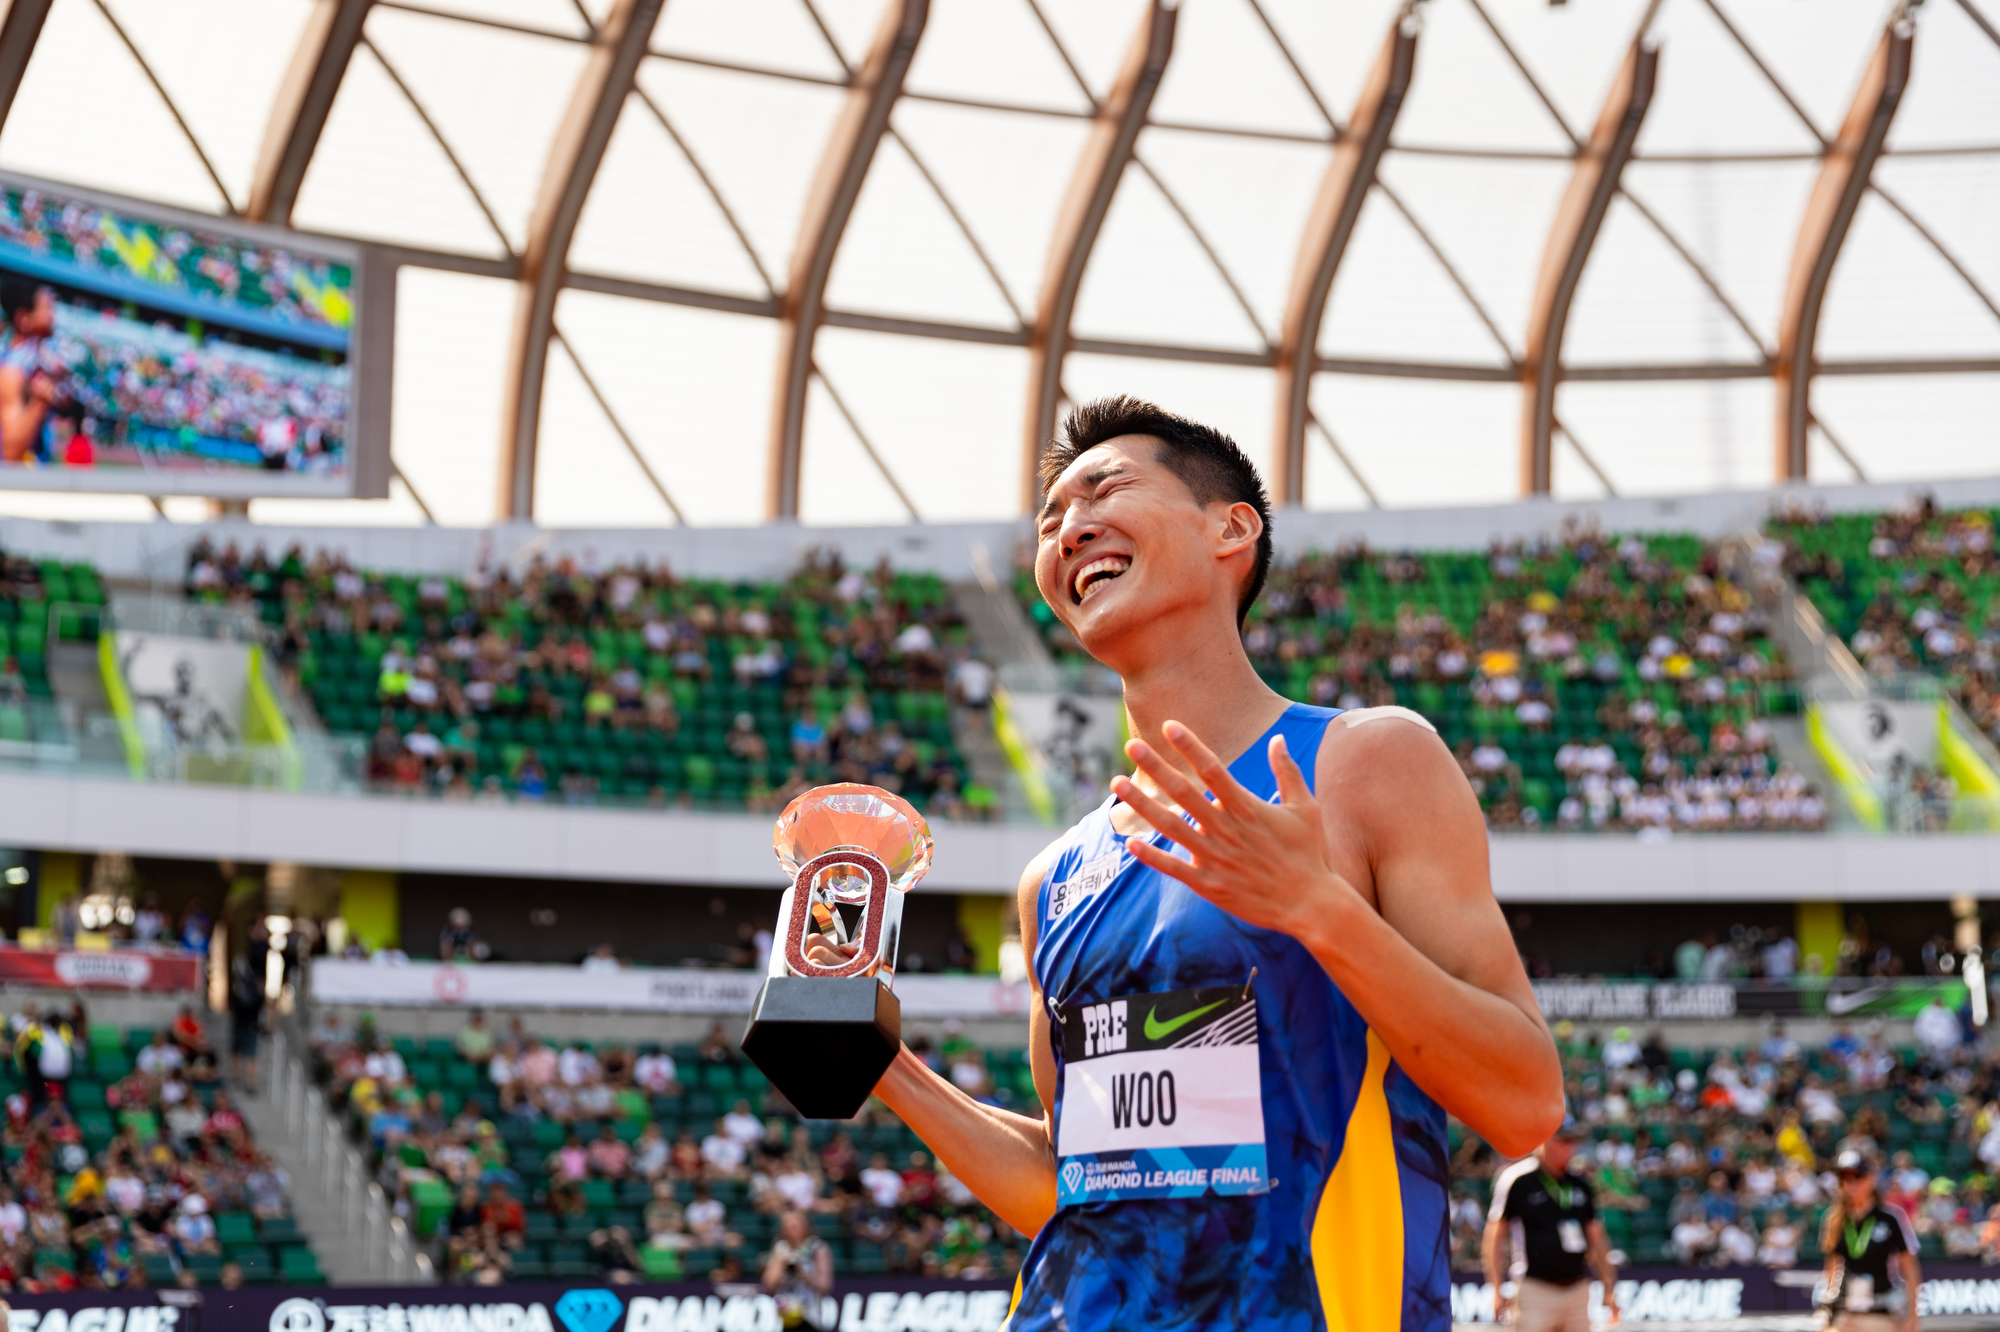 South Korea's Sanghyeok Woo celebrates with the Diamond League trophy after winning the men's high jump at the Prefontaine Classic track and field meet on Saturday, Sept. 16, 2023, at Hayward Field in Eugene.